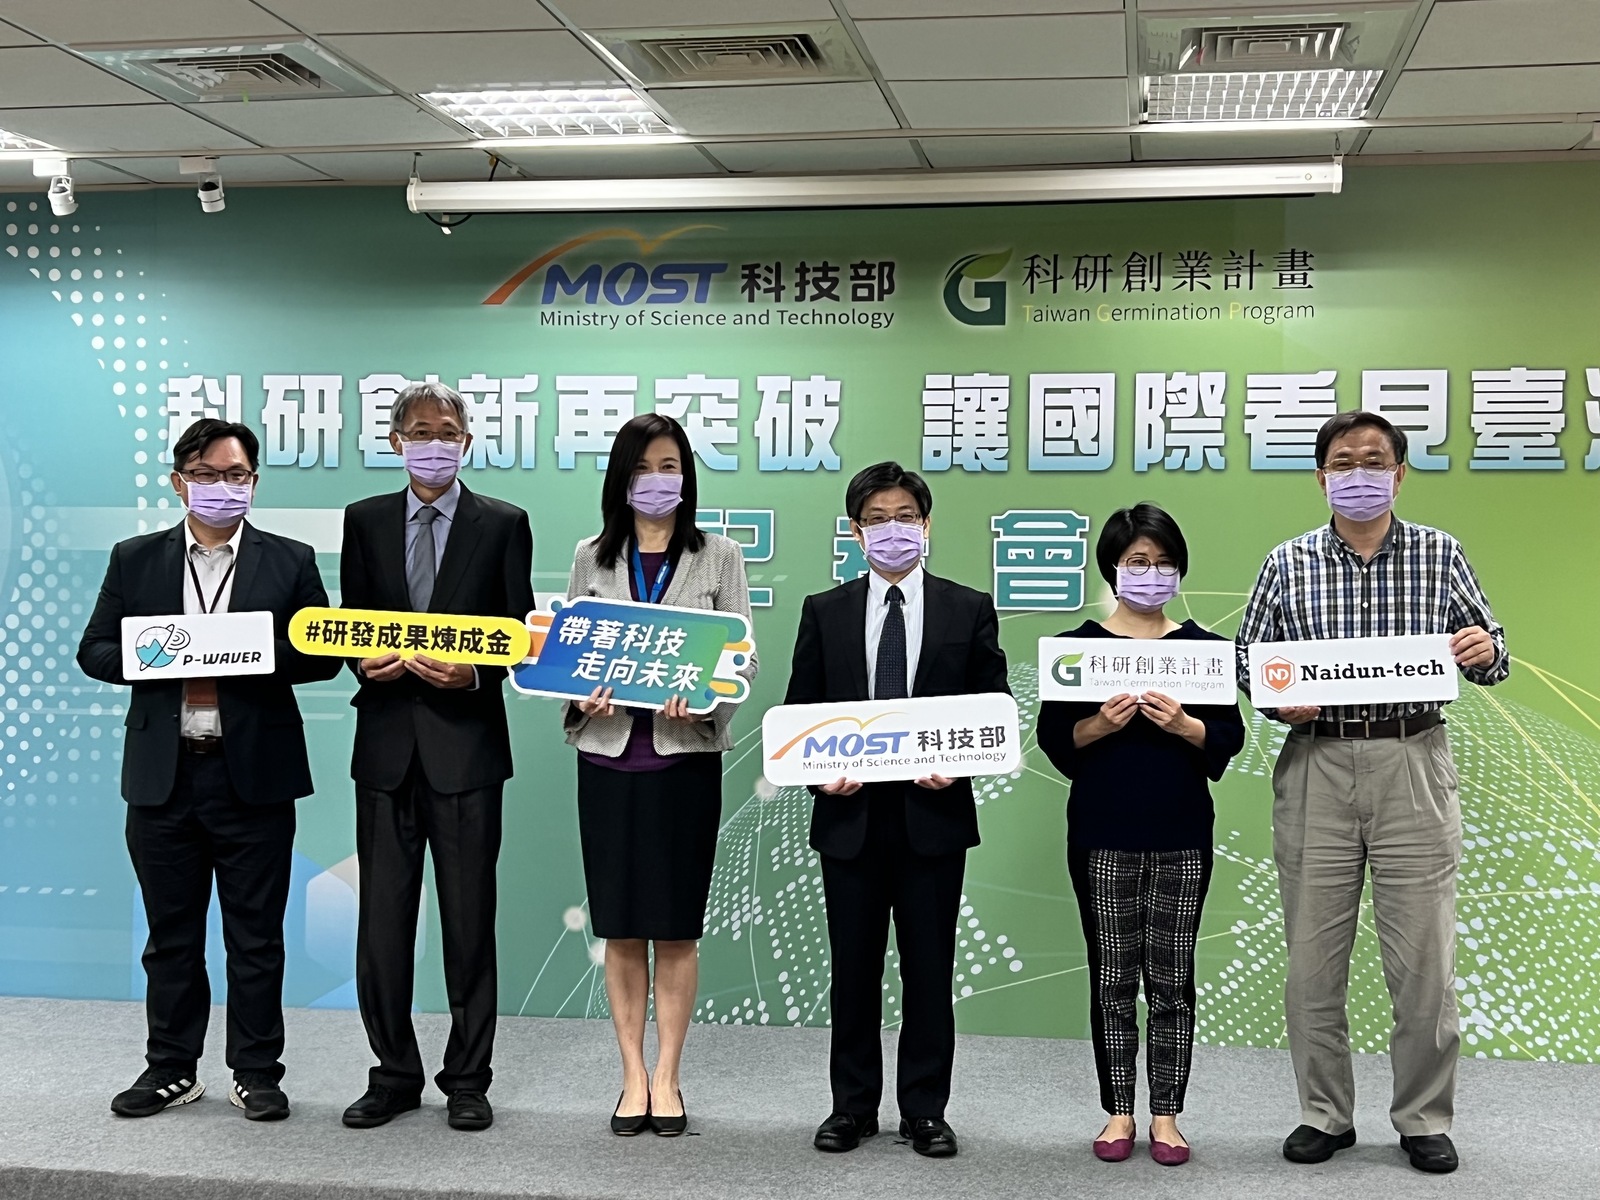 NSYSU’s original Supercritical Fluid Technology is admitted to Taiwan Germination Program by Ministry of Science and Technology, the ceremony attendees includes MOST Vice Minister Tzong-Chyuan Chen (third from right) and Ting-Chang Chang, distinguished chair professor of the Department of Physics, NSYSU (first from right)